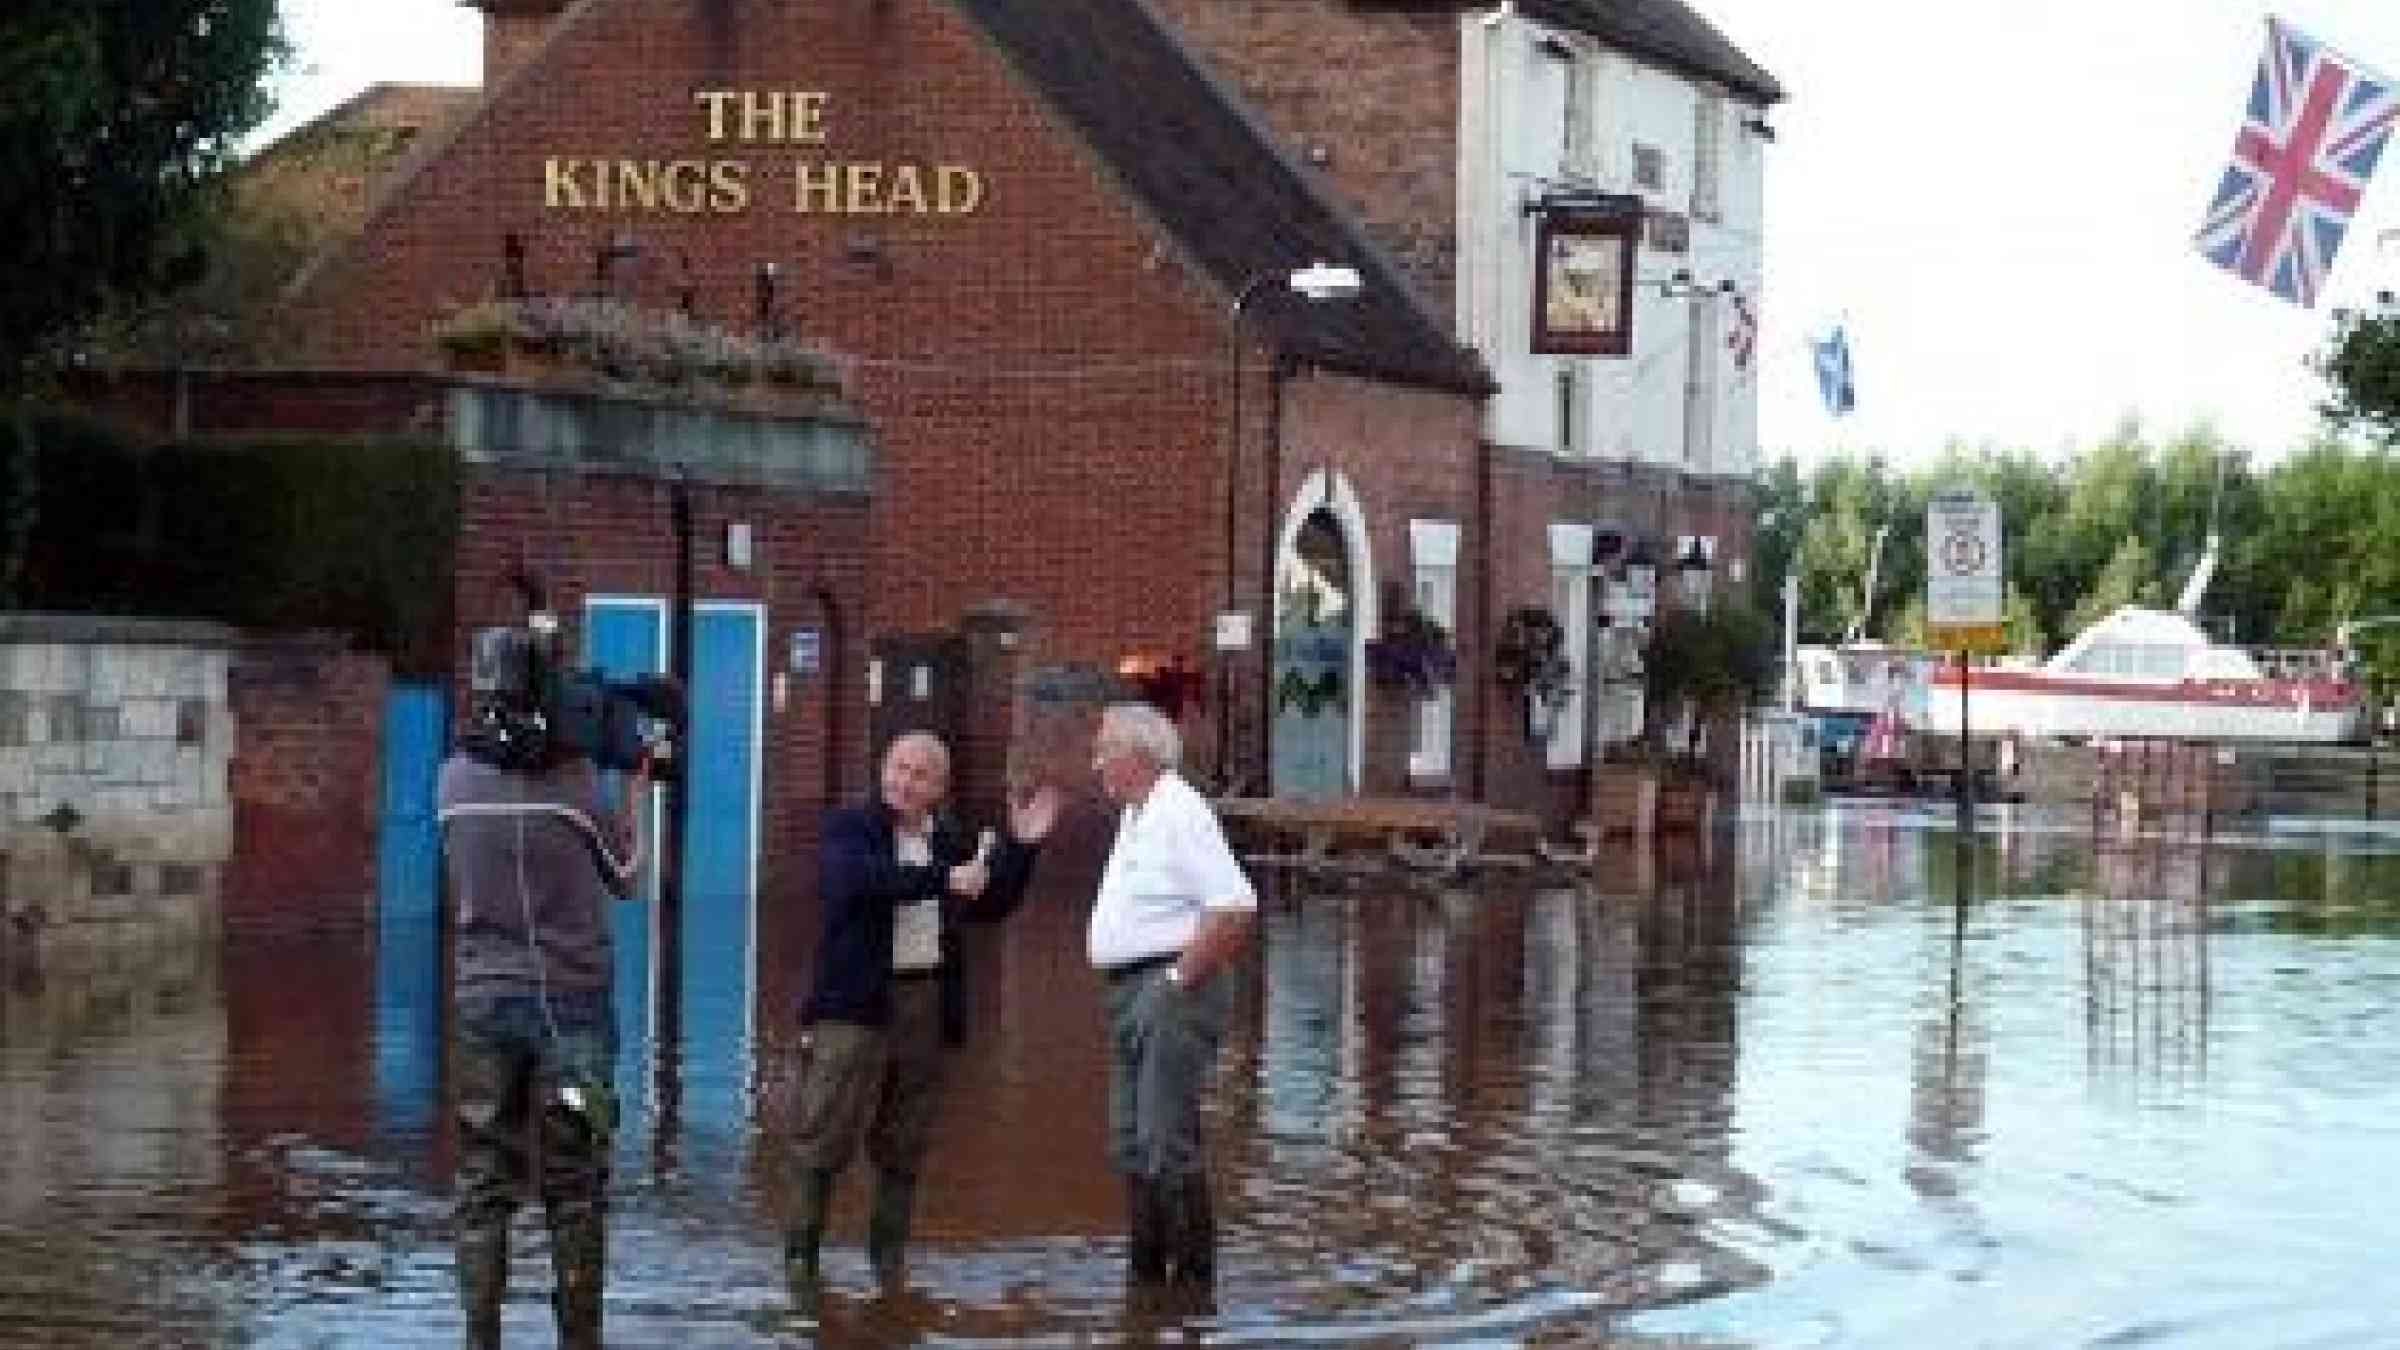 The 2007 floods in the United Kingdom were a wake-up call for the country's management of disaster risk